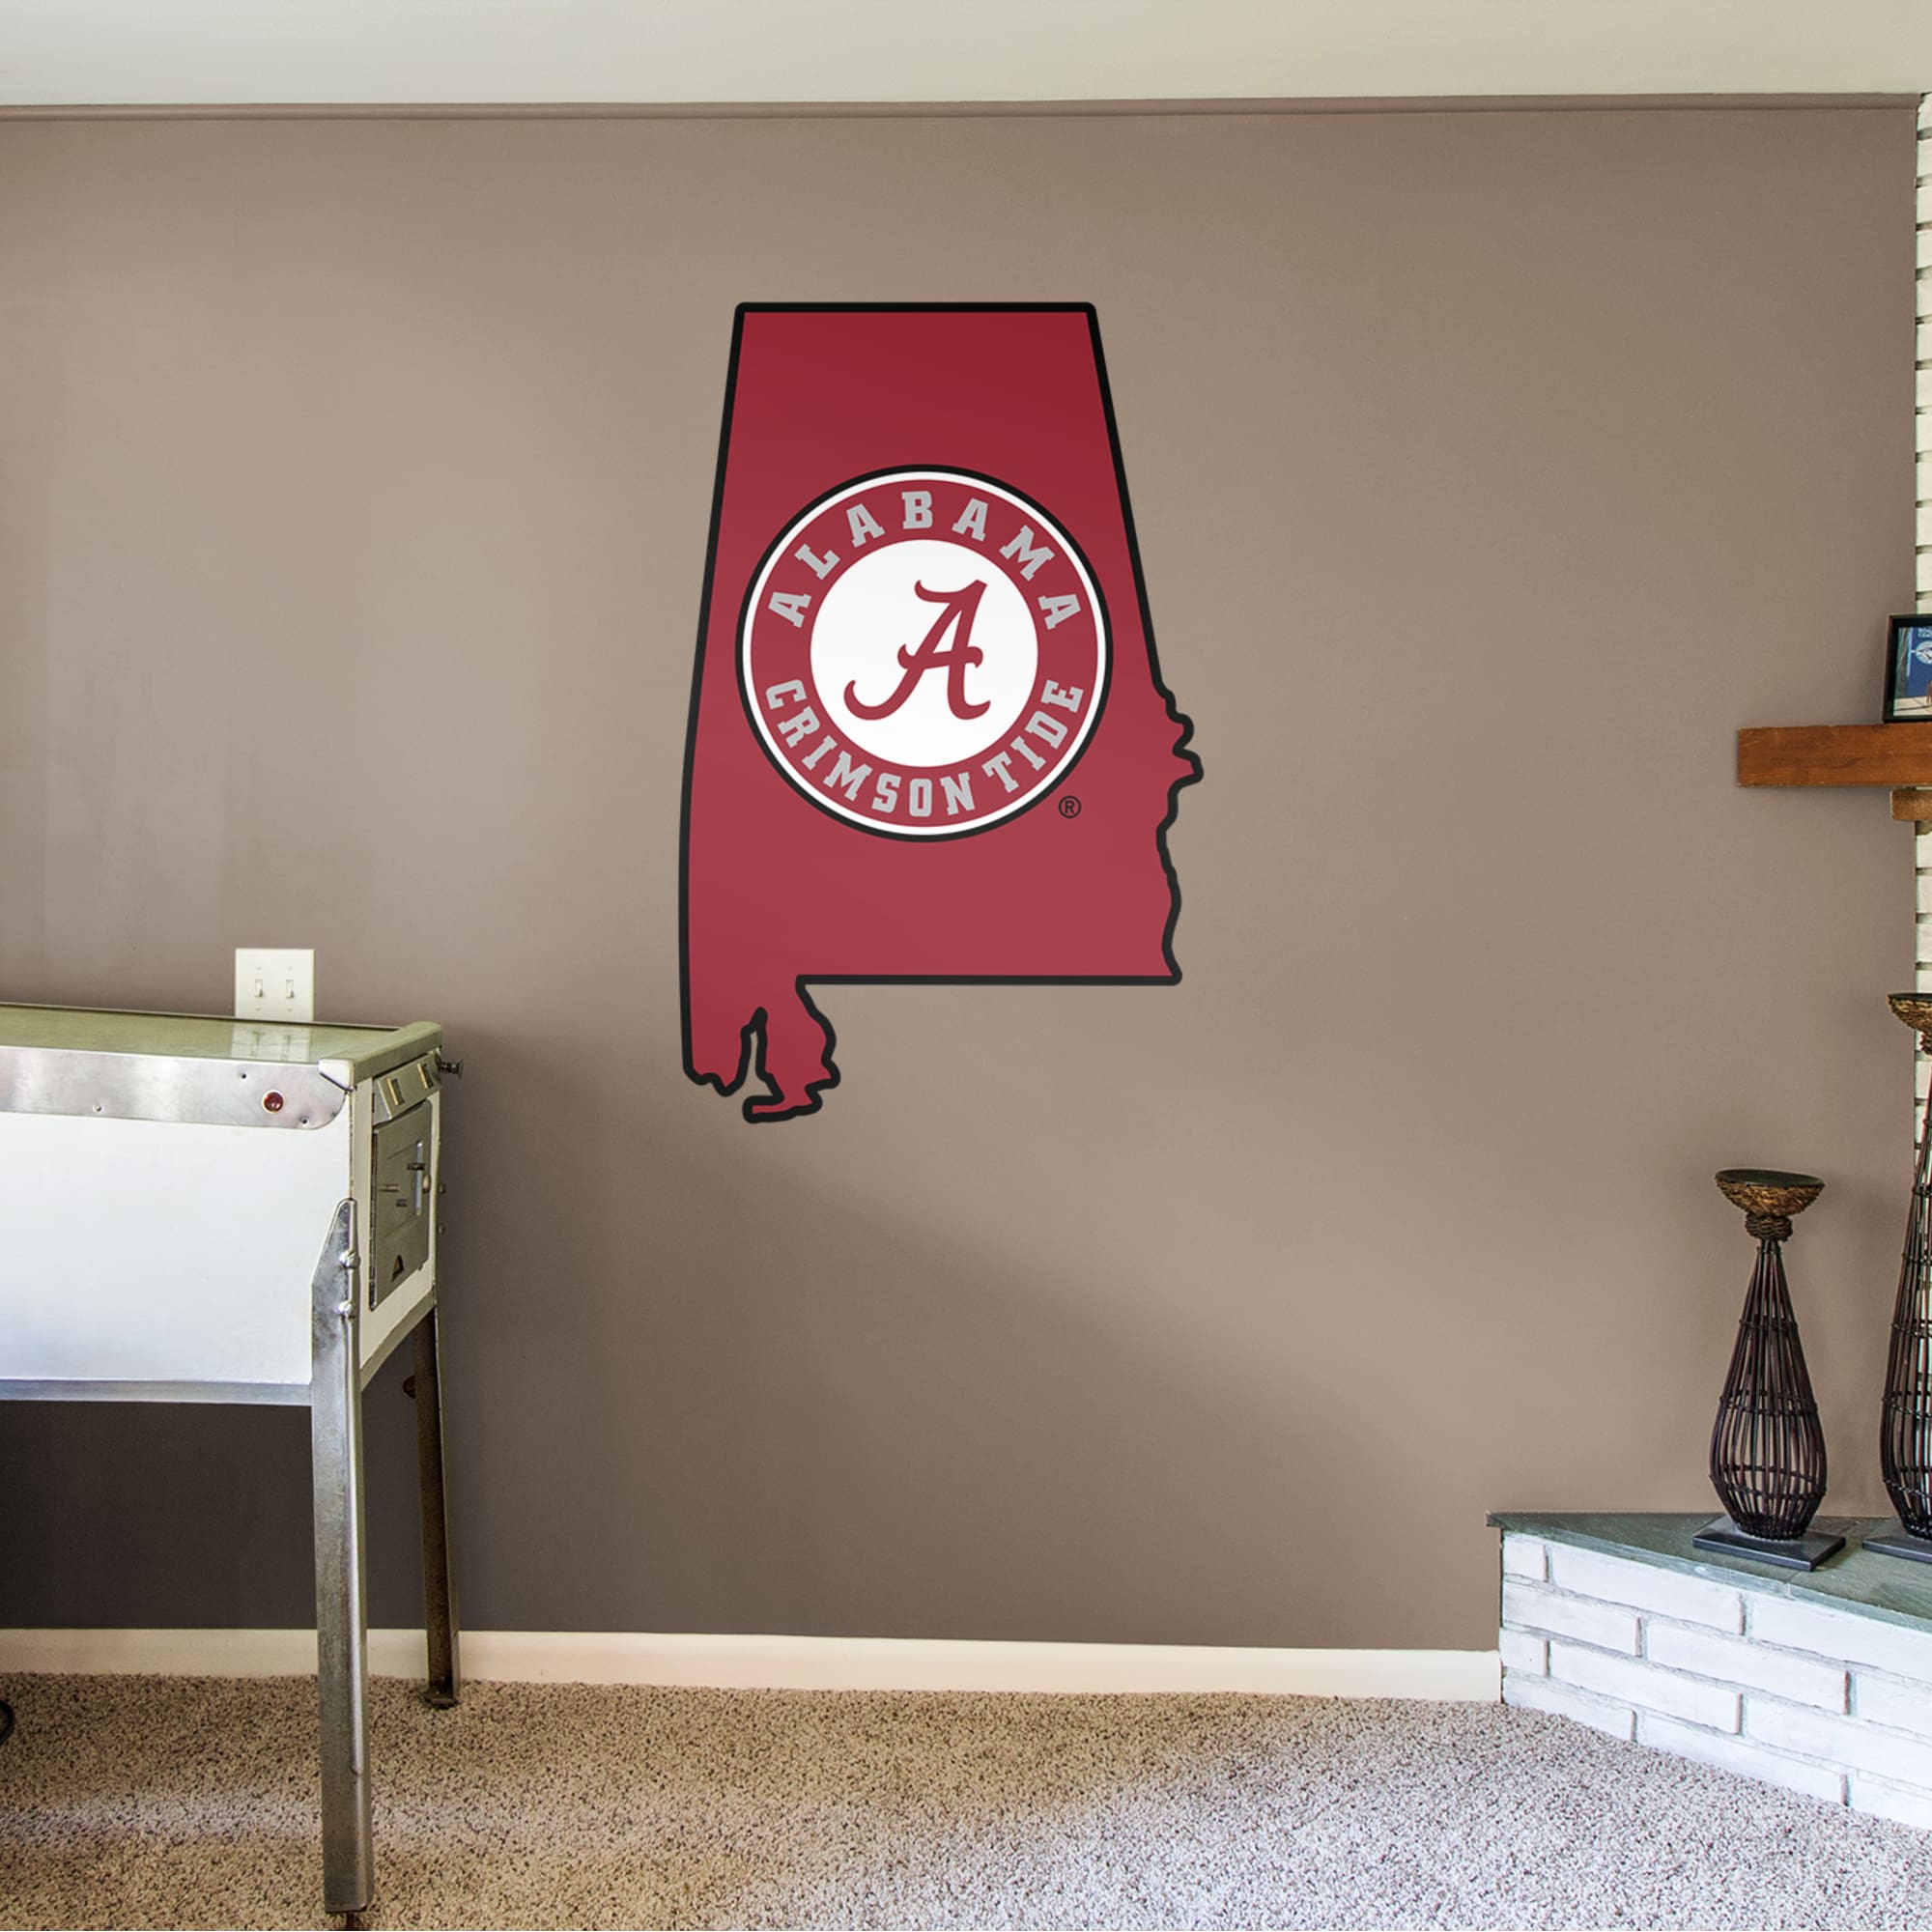 Alabama Crimson Tide: State of Alabama - Officially Licensed Removable Wall Decal 33.0"W x 51.0"H by Fathead | Vinyl